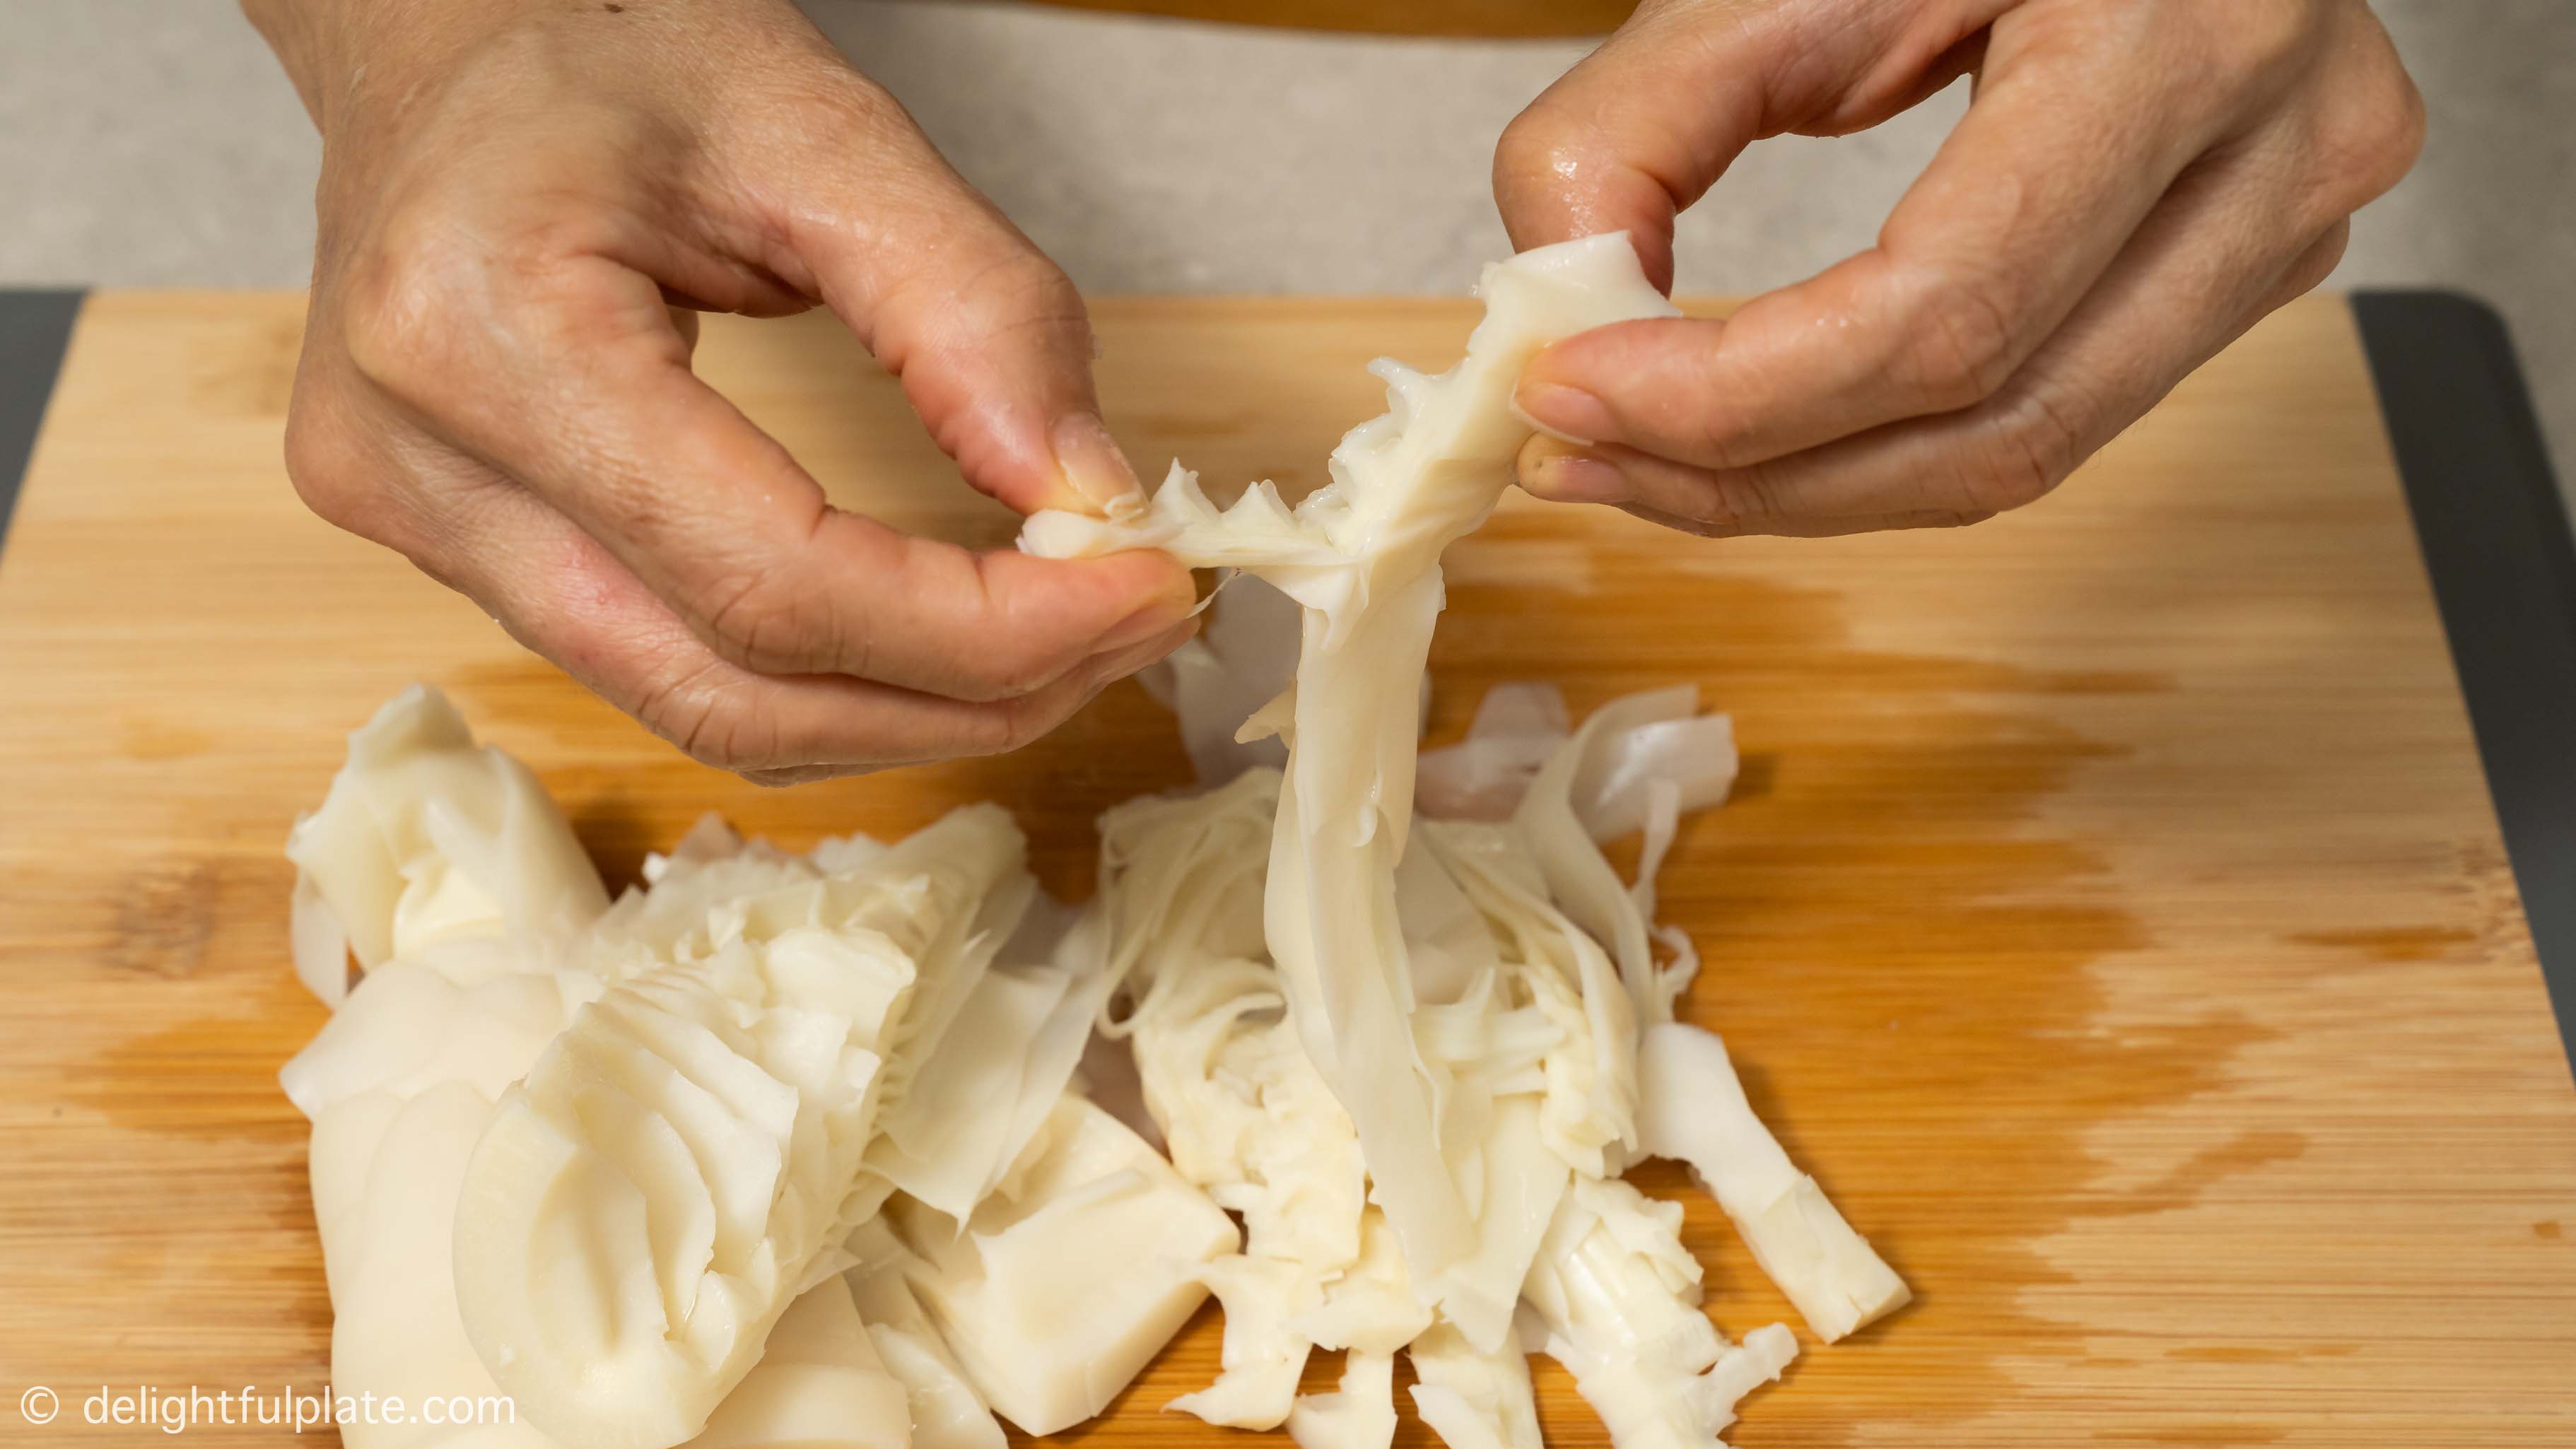 shredding boiled bamboo shoots by hands